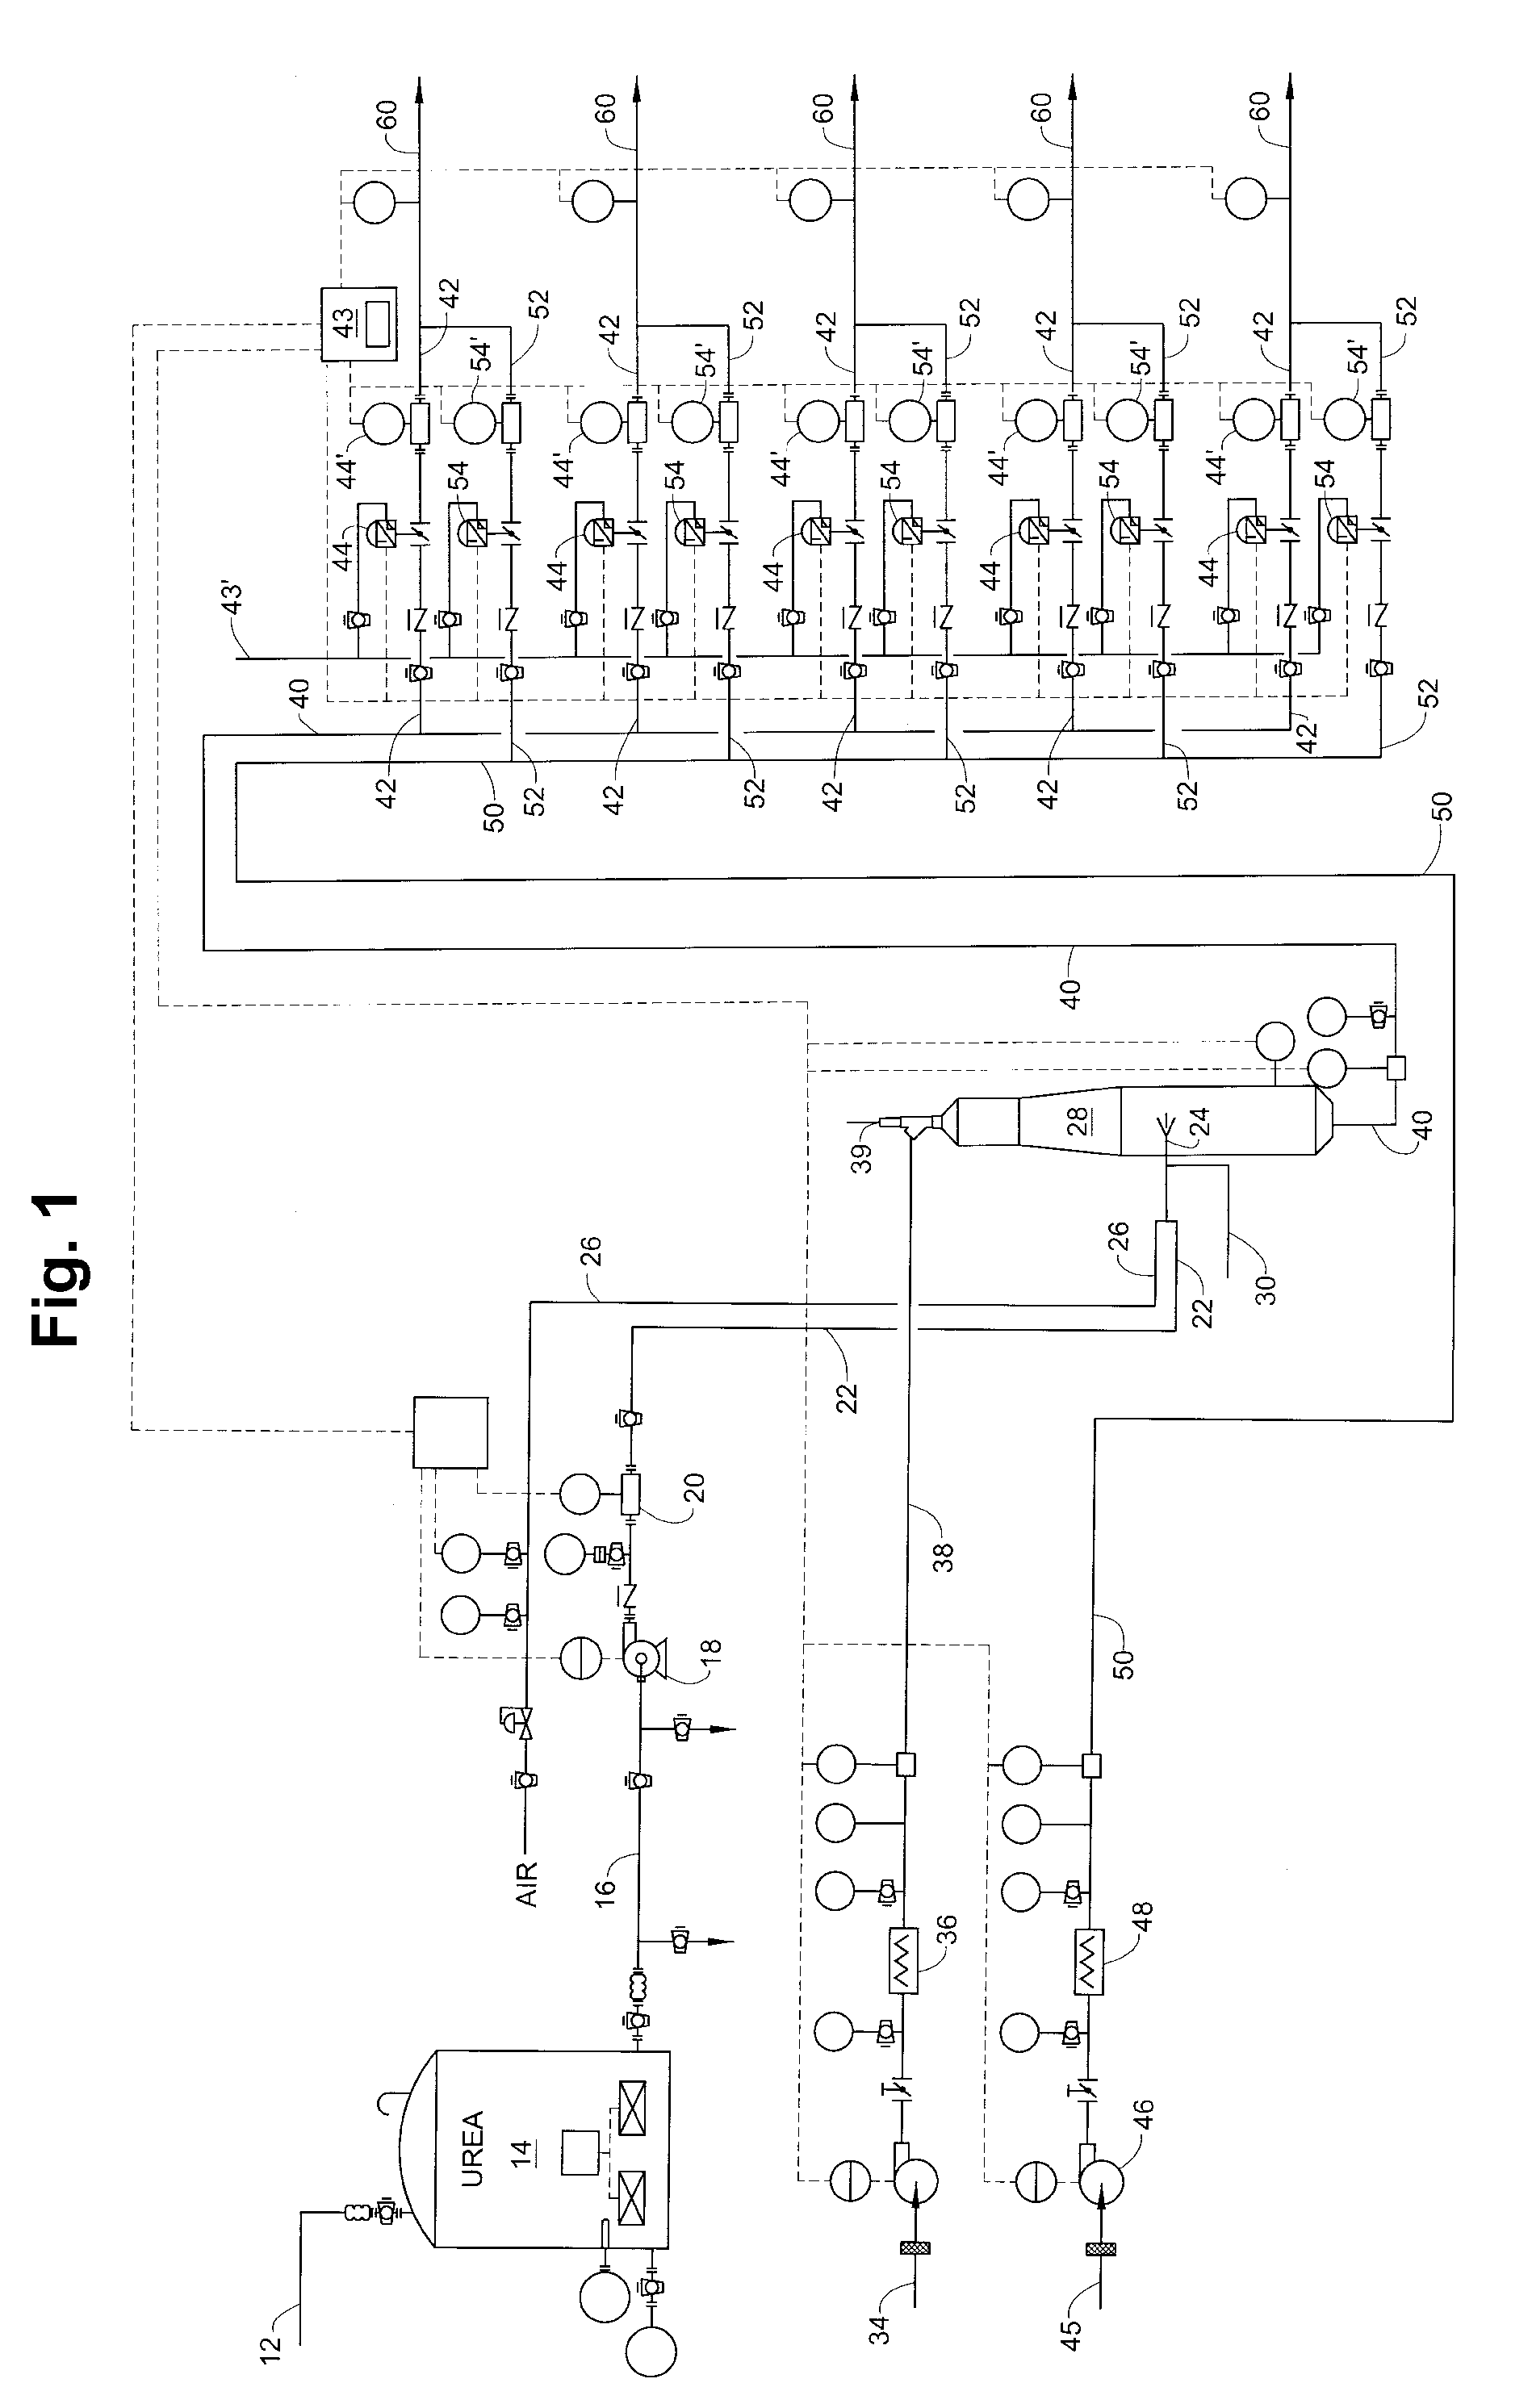 Selective Catalytic NOx Reduction Process and Control System